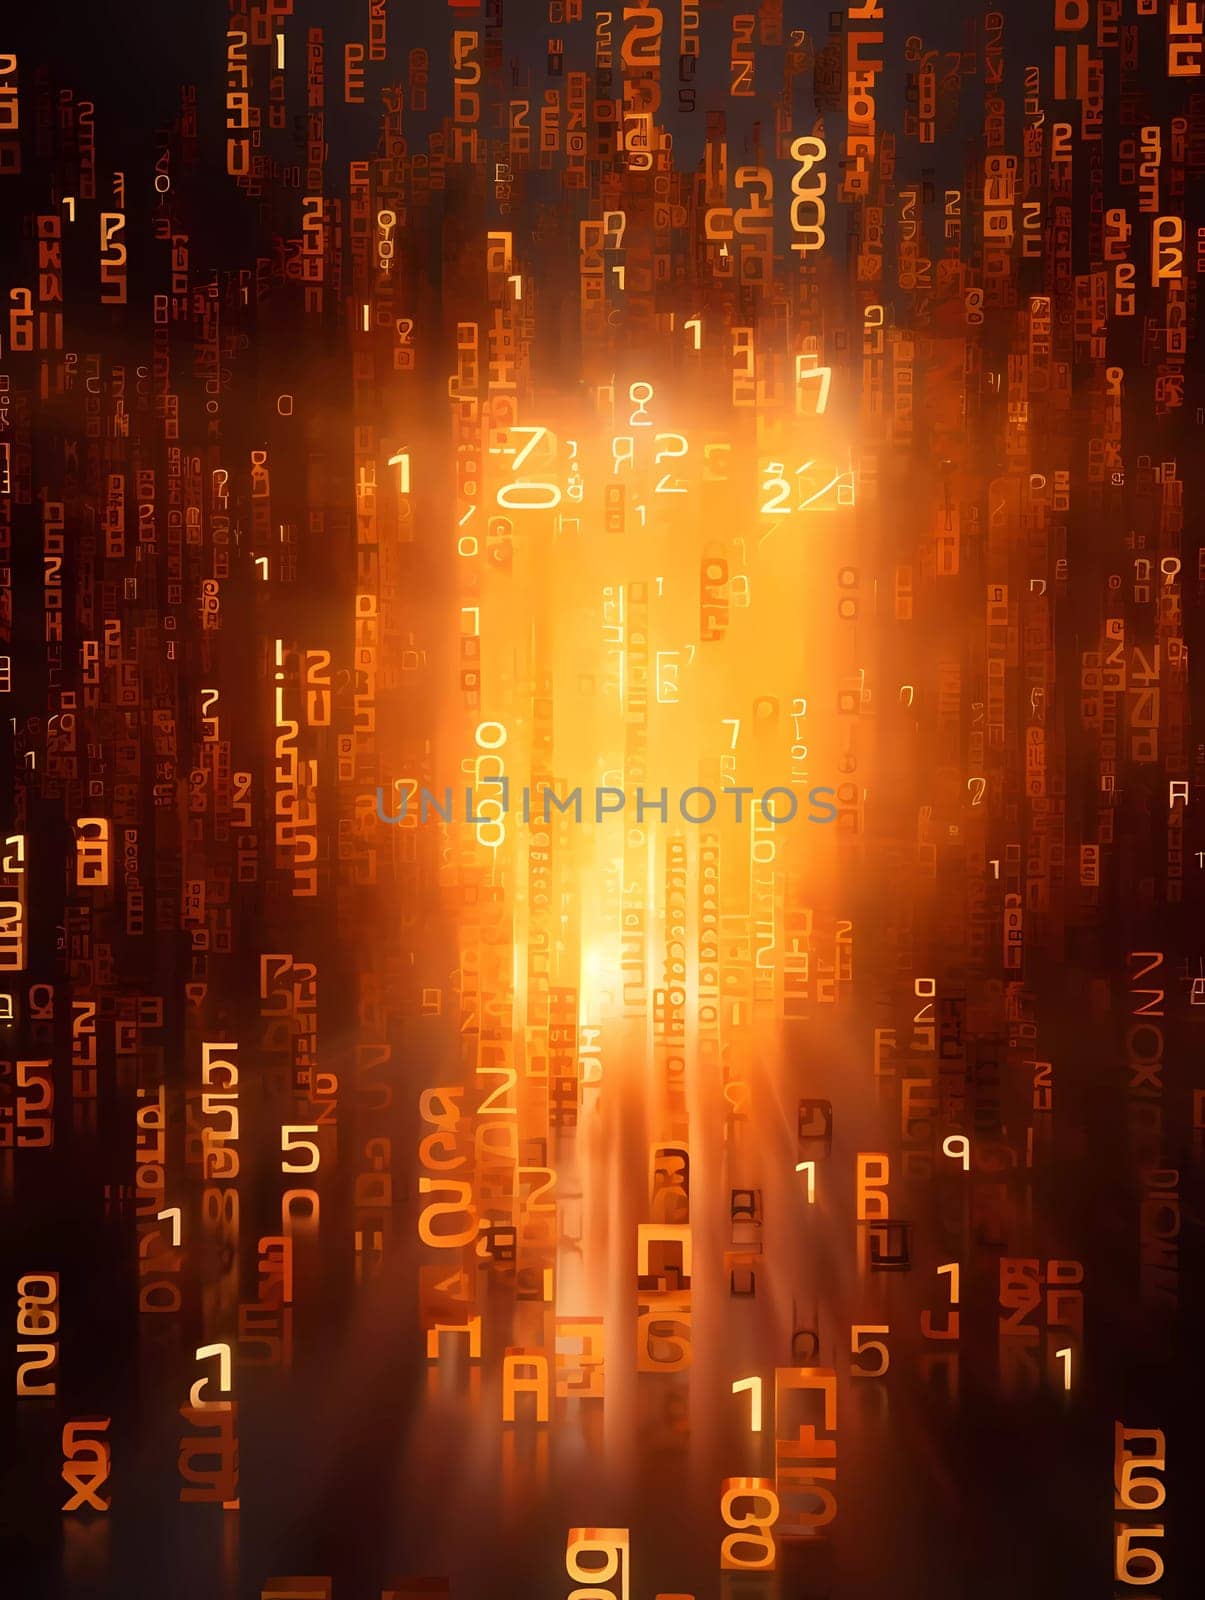 Computer background with orange digits and symbols on a black background